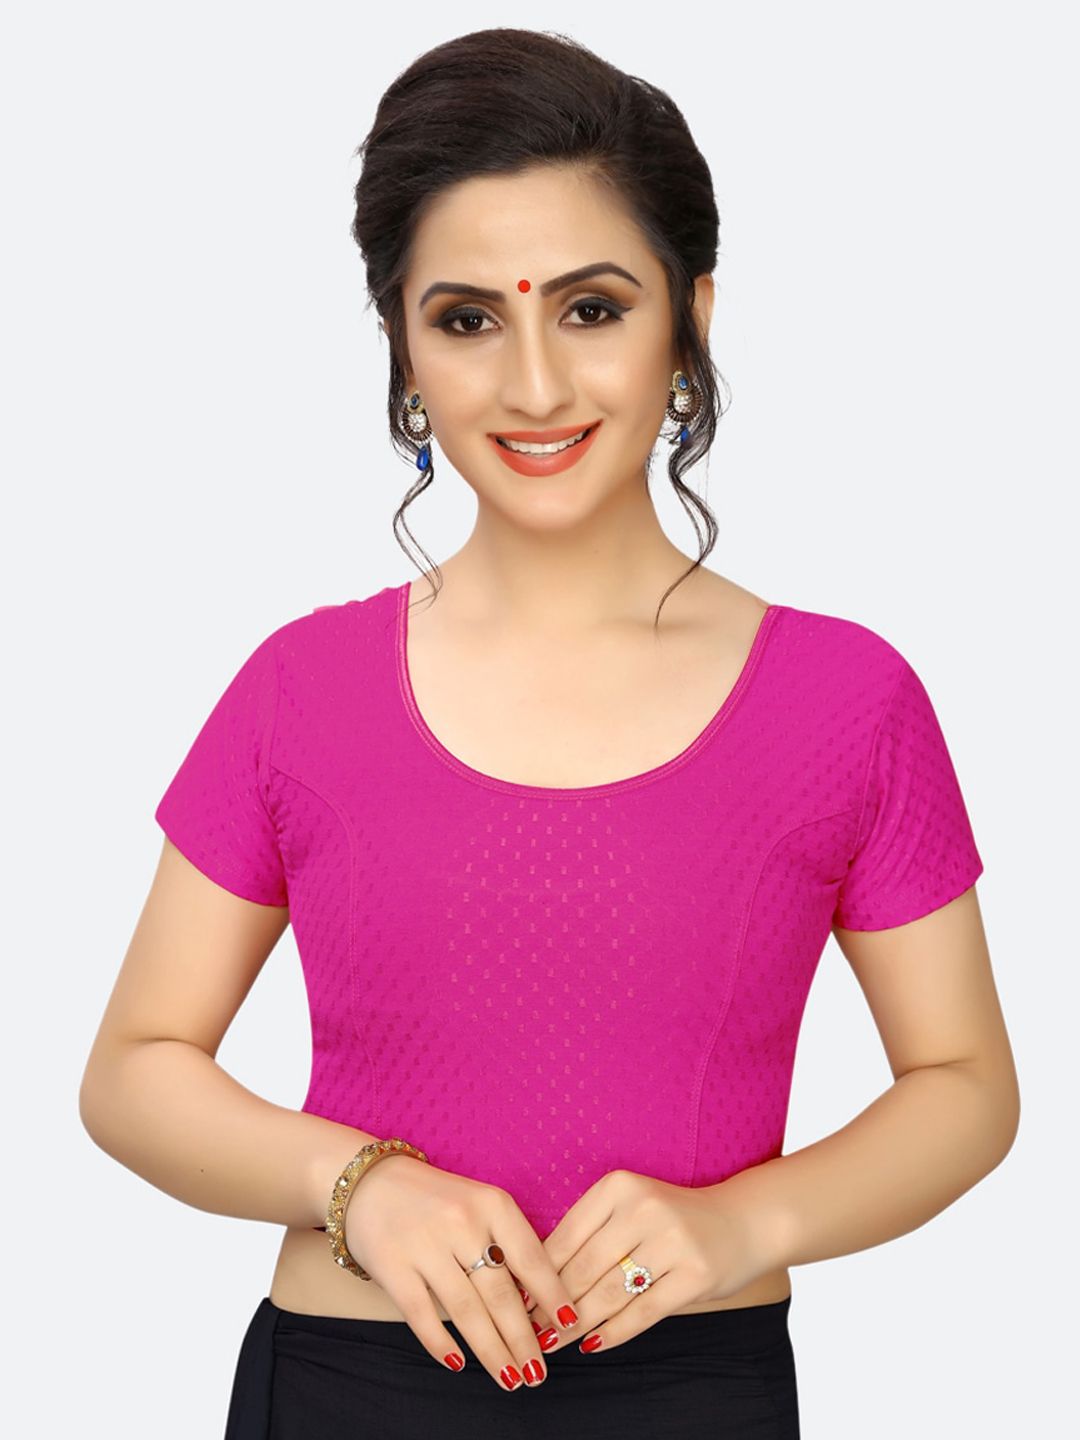 SIRIL Pink Woven-Design Saree Blouse Price in India